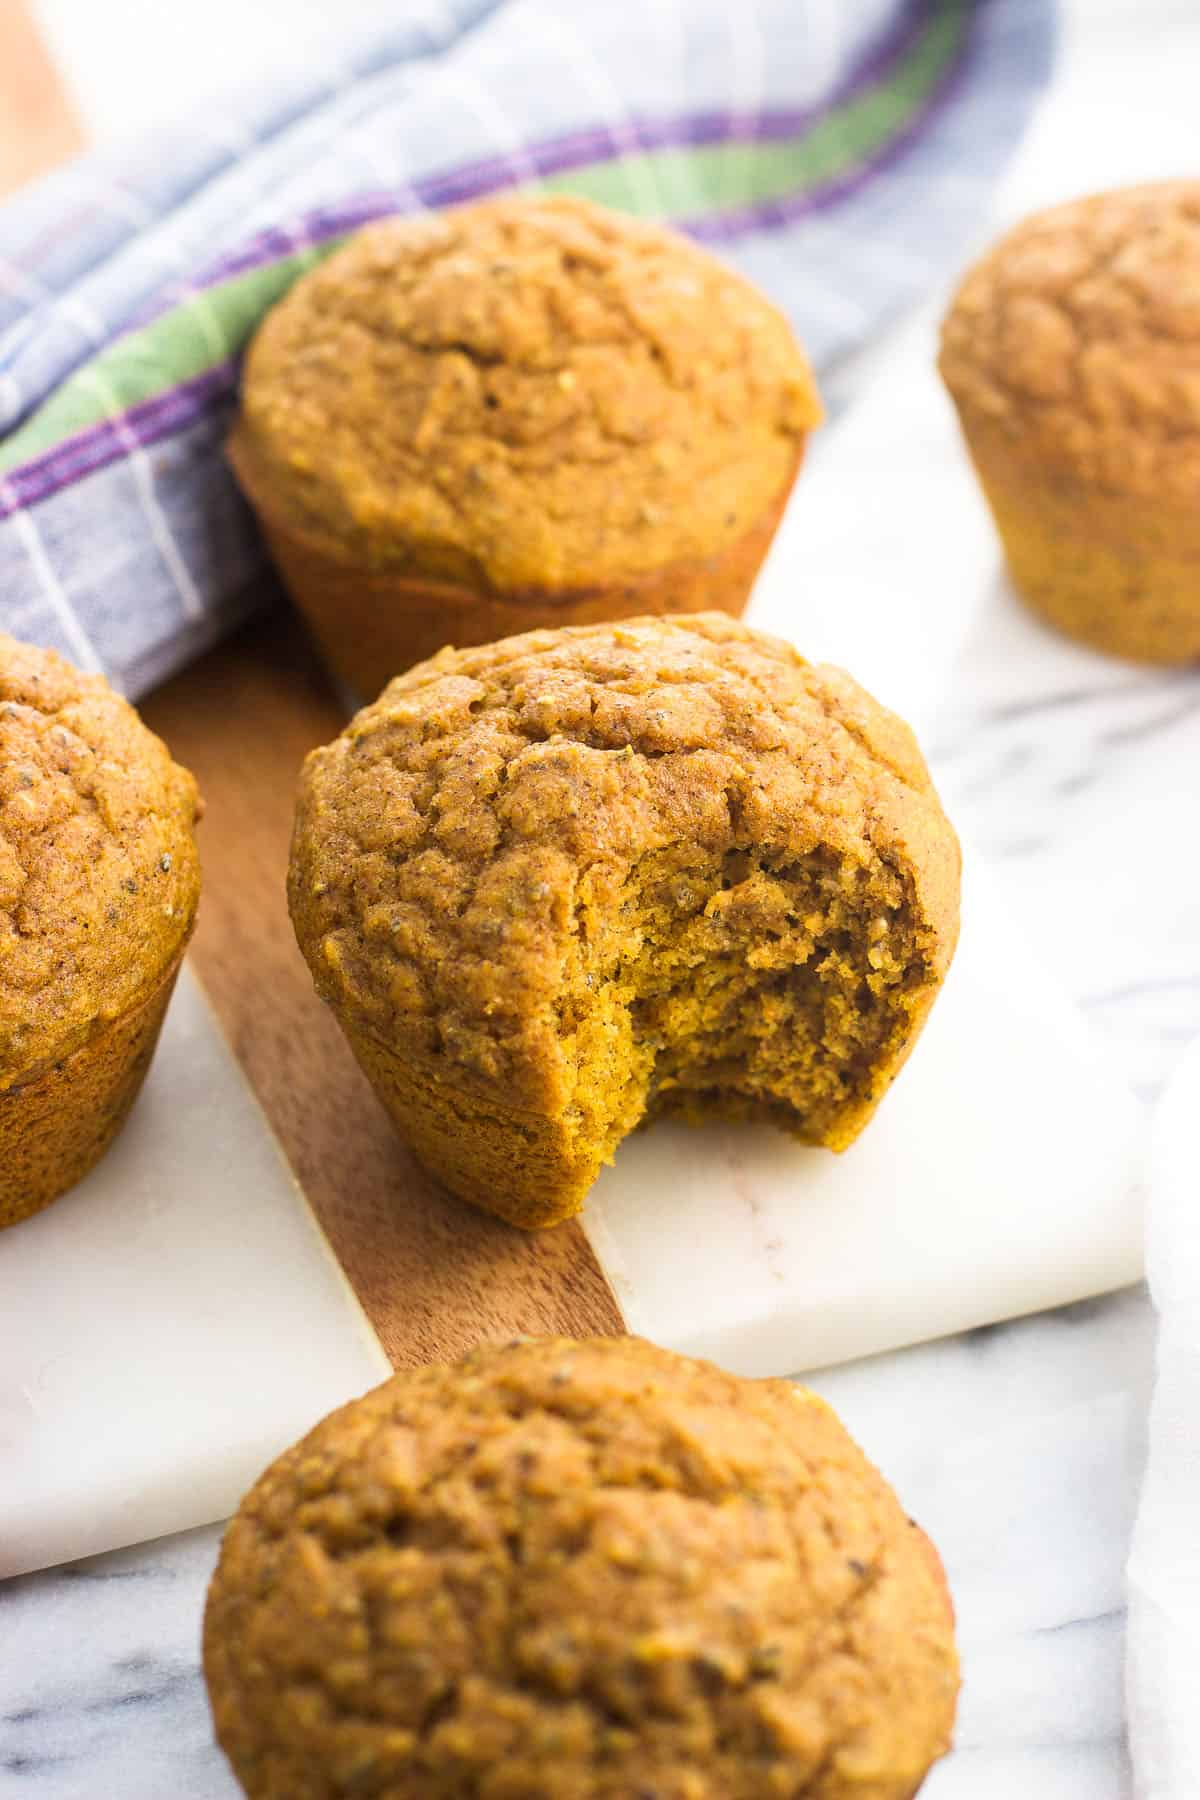 Pumpkin muffins on a serving board with a bite taken out of one.